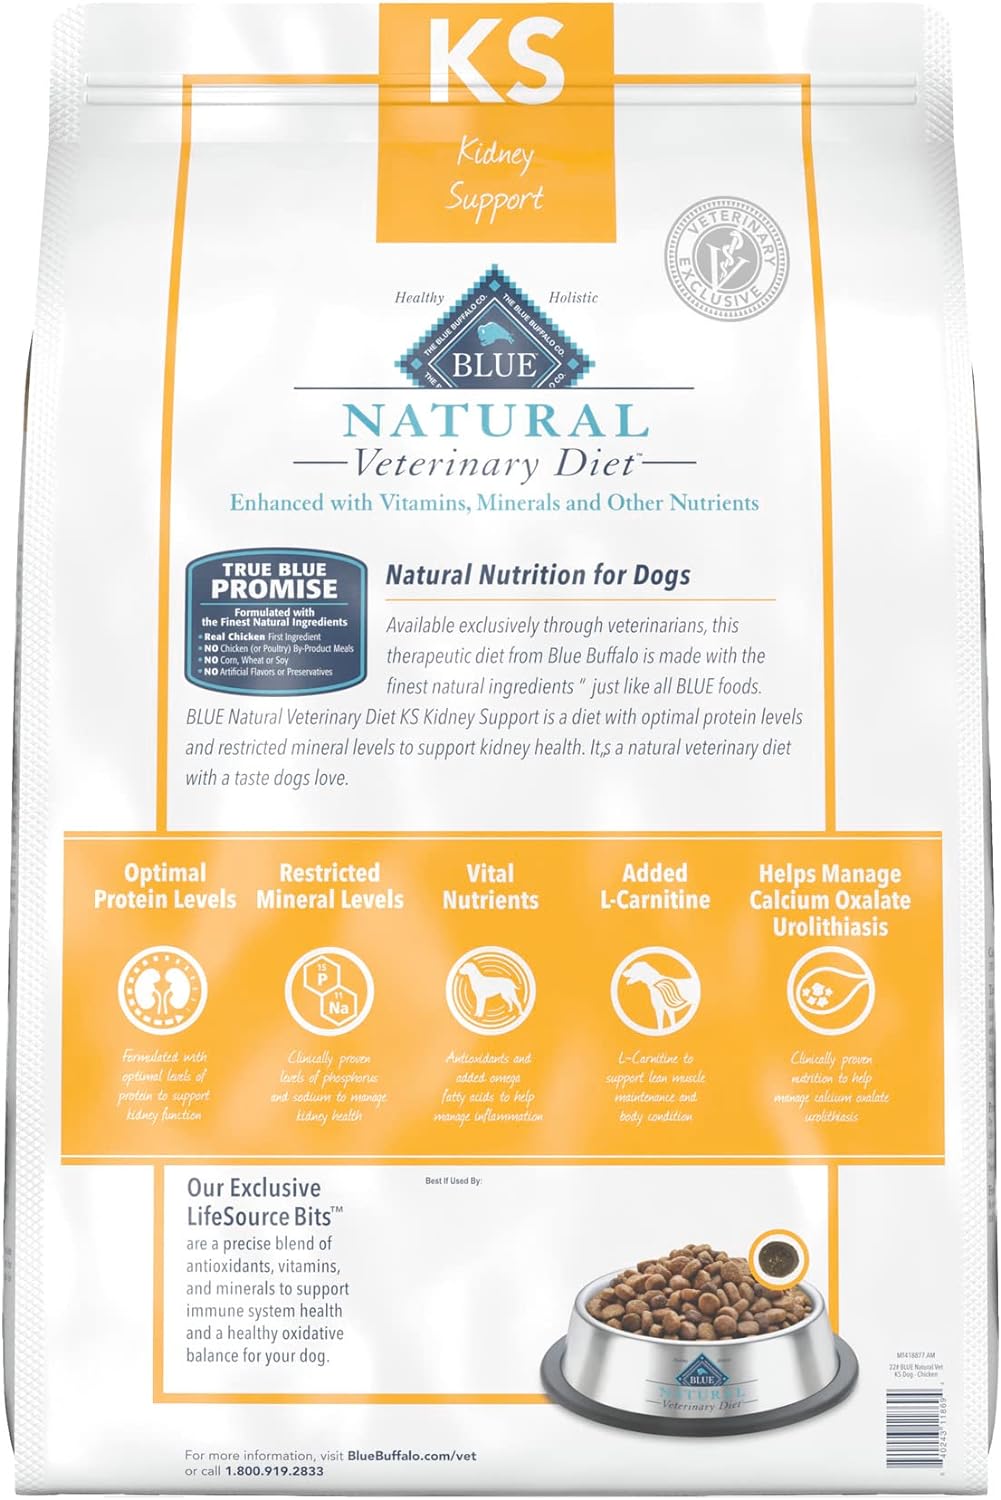 Blue Natural Veterinary Diet KS Kidney Support Dry Dog Food – Gallery Image 2